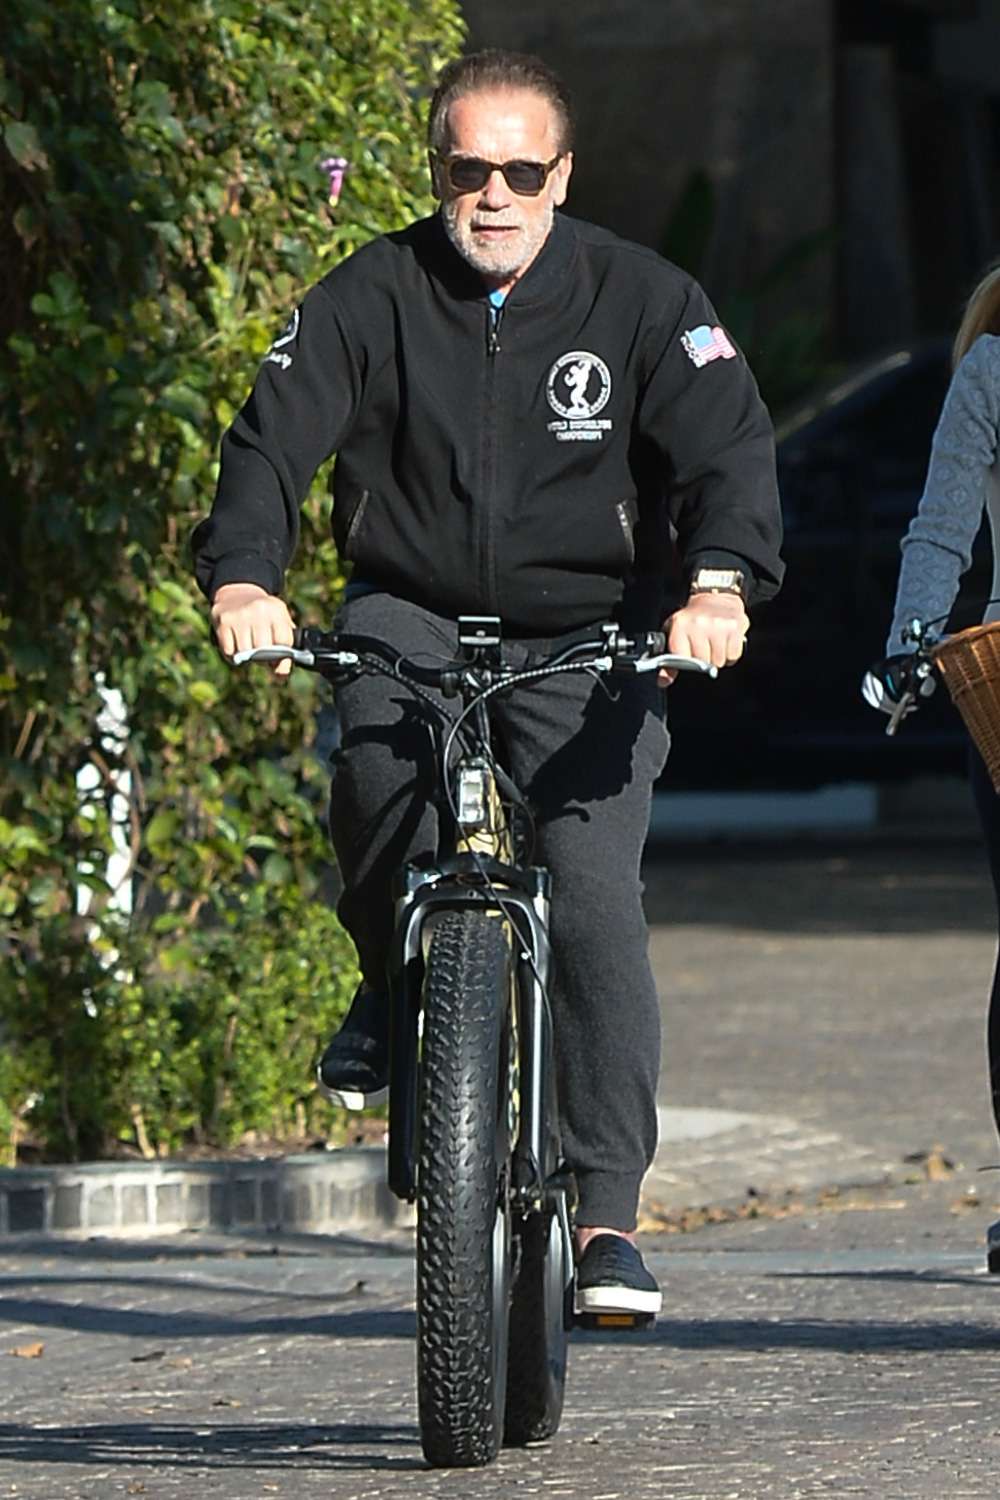 Arnold Schwarzenegger Goes for a Bike Ride with Friends.